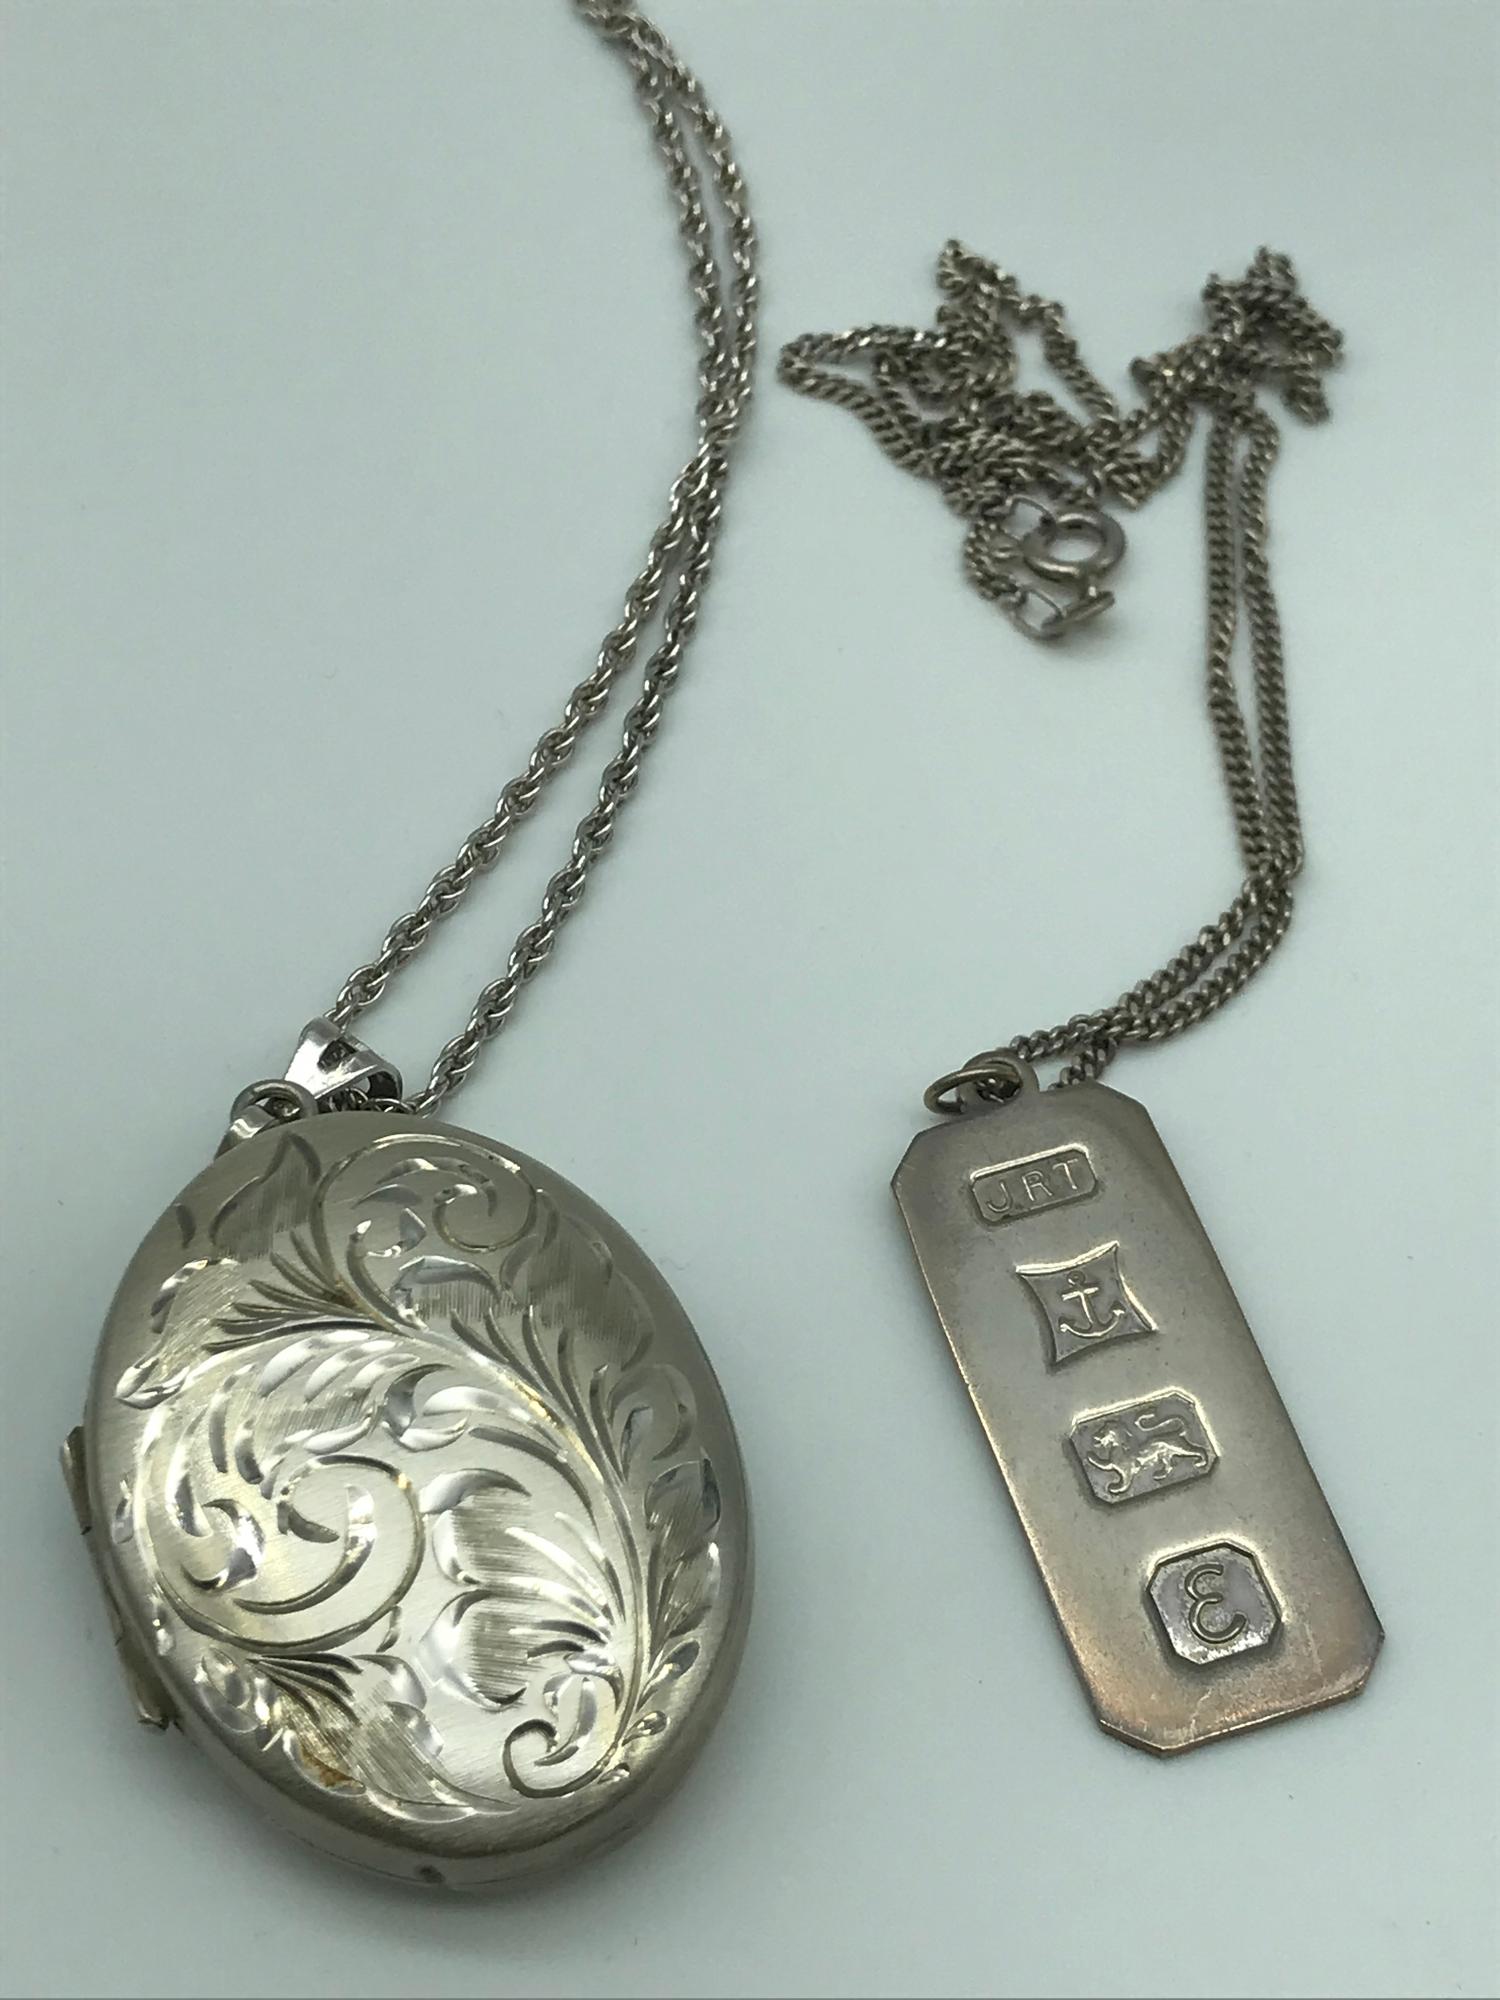 Sheffield silver ornate engraved locket with silver chain together with Birmingham silver Ingot